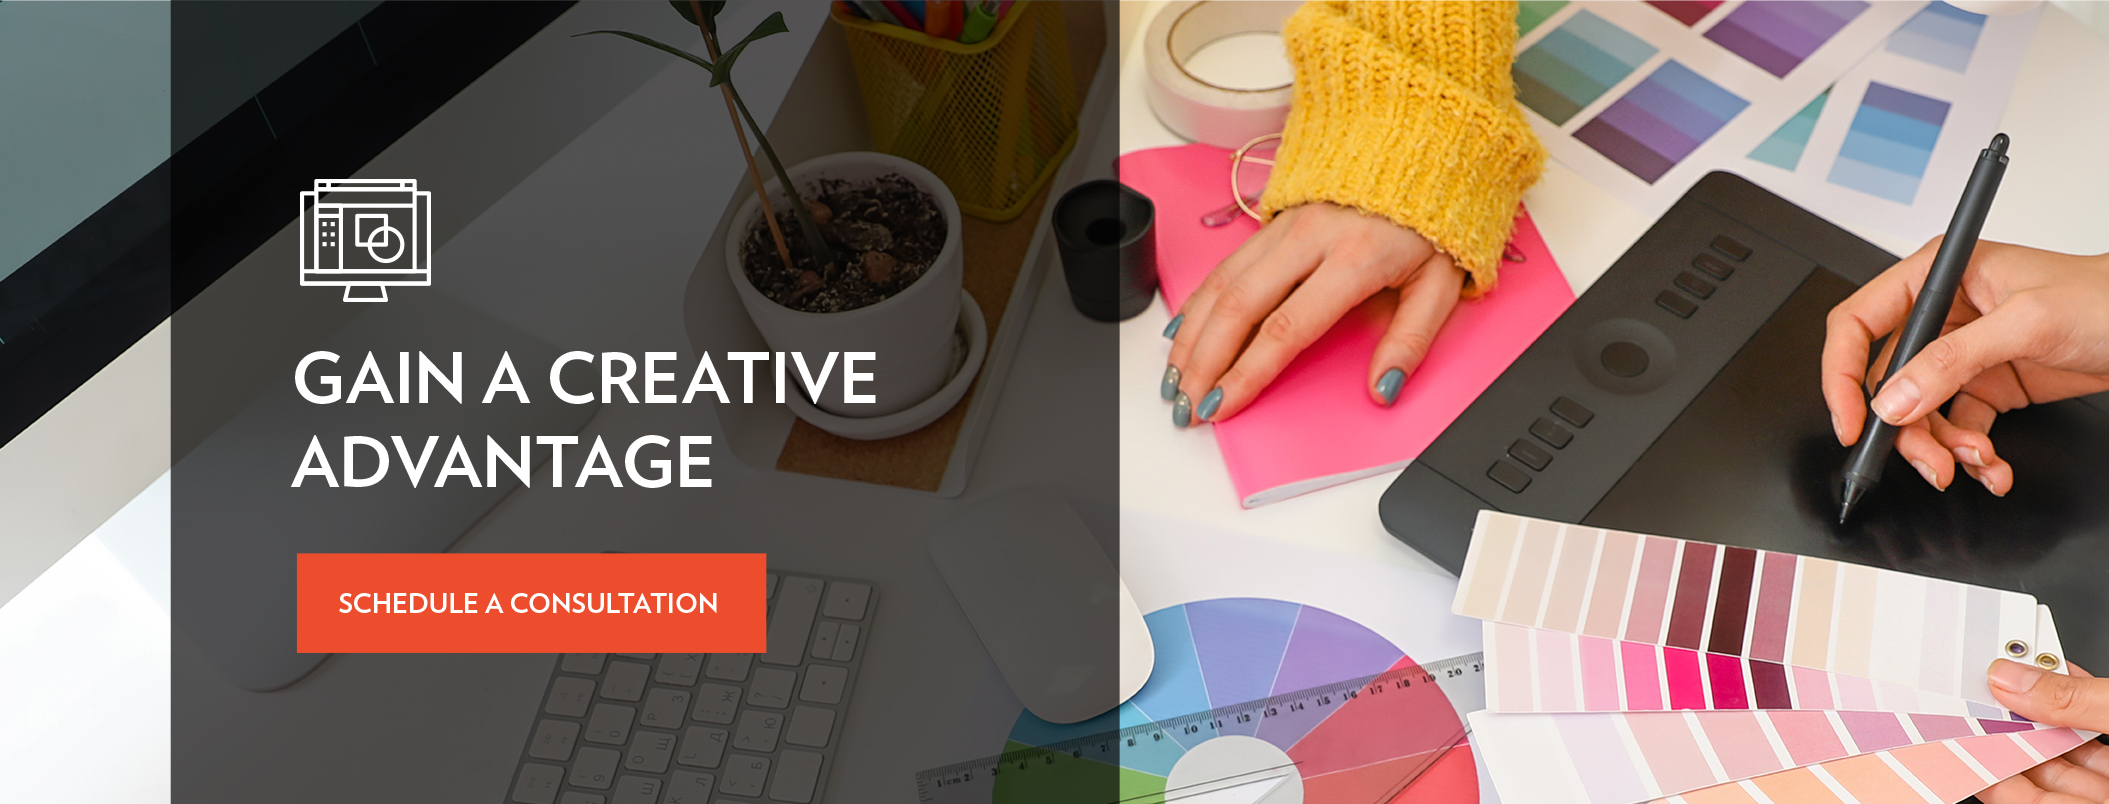 Creative Agency Services 